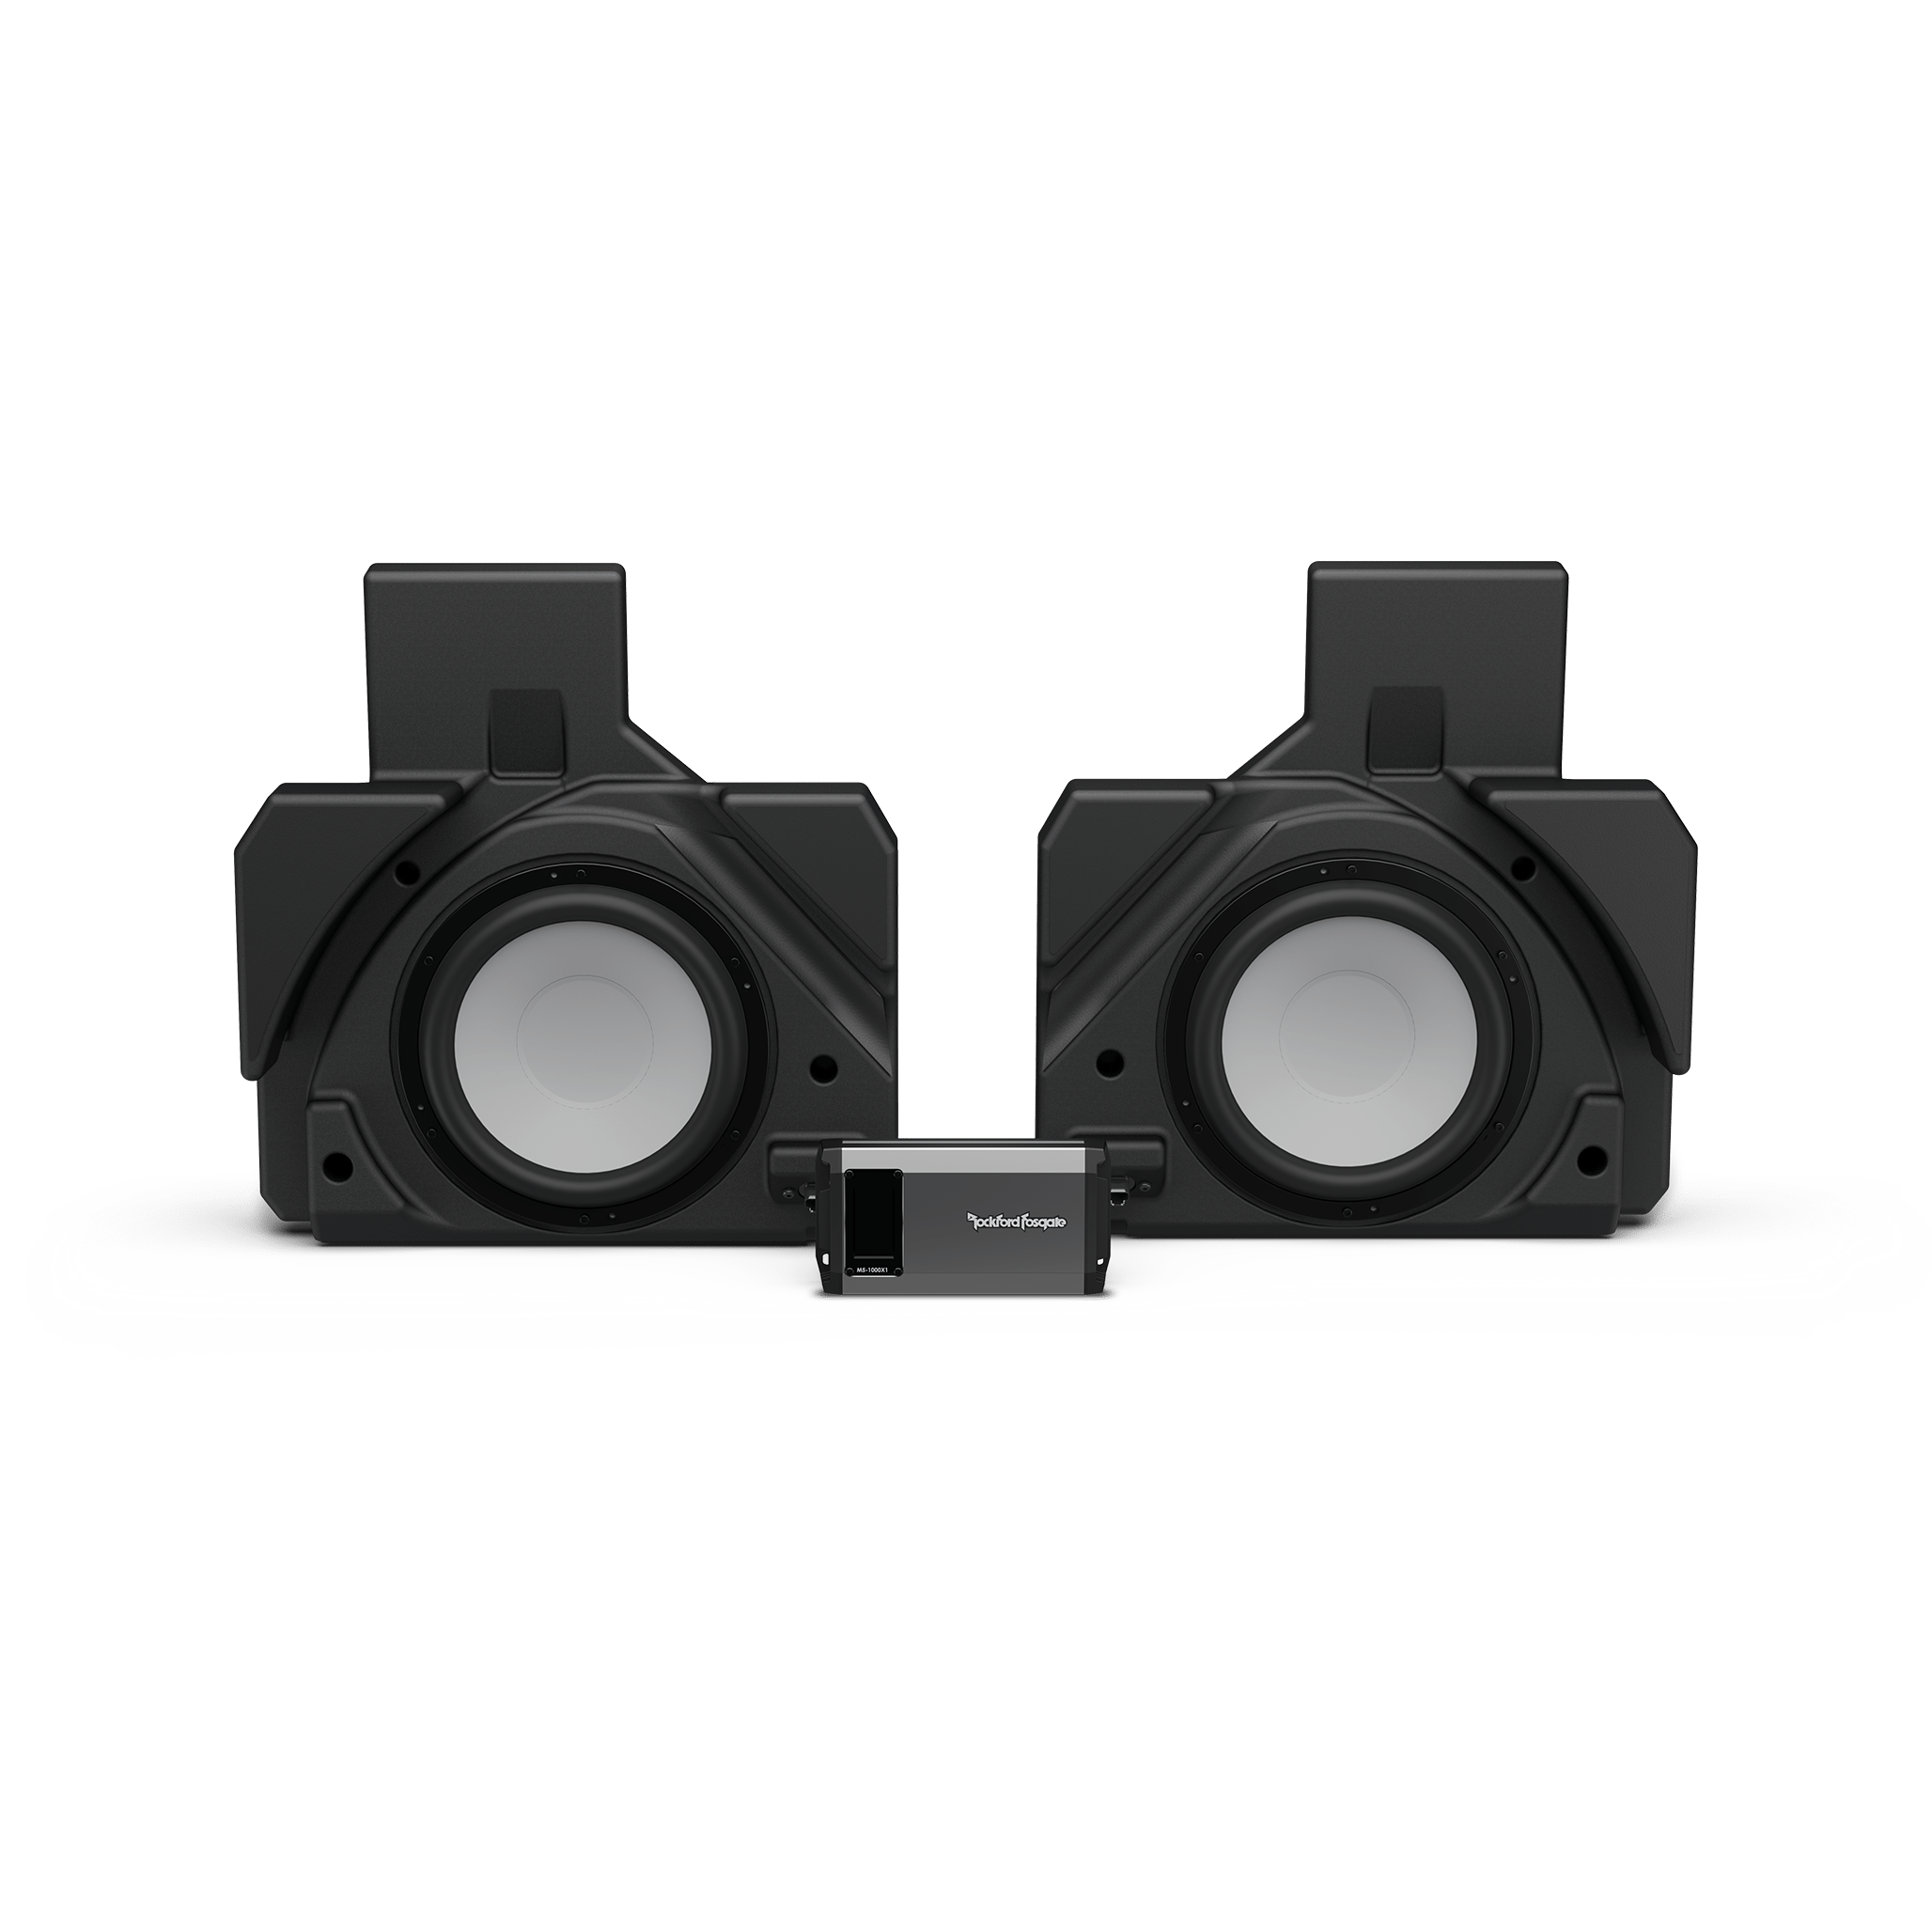 ROCKFORD Can-Am Can Am Maveric X3 Subwoofer Kit